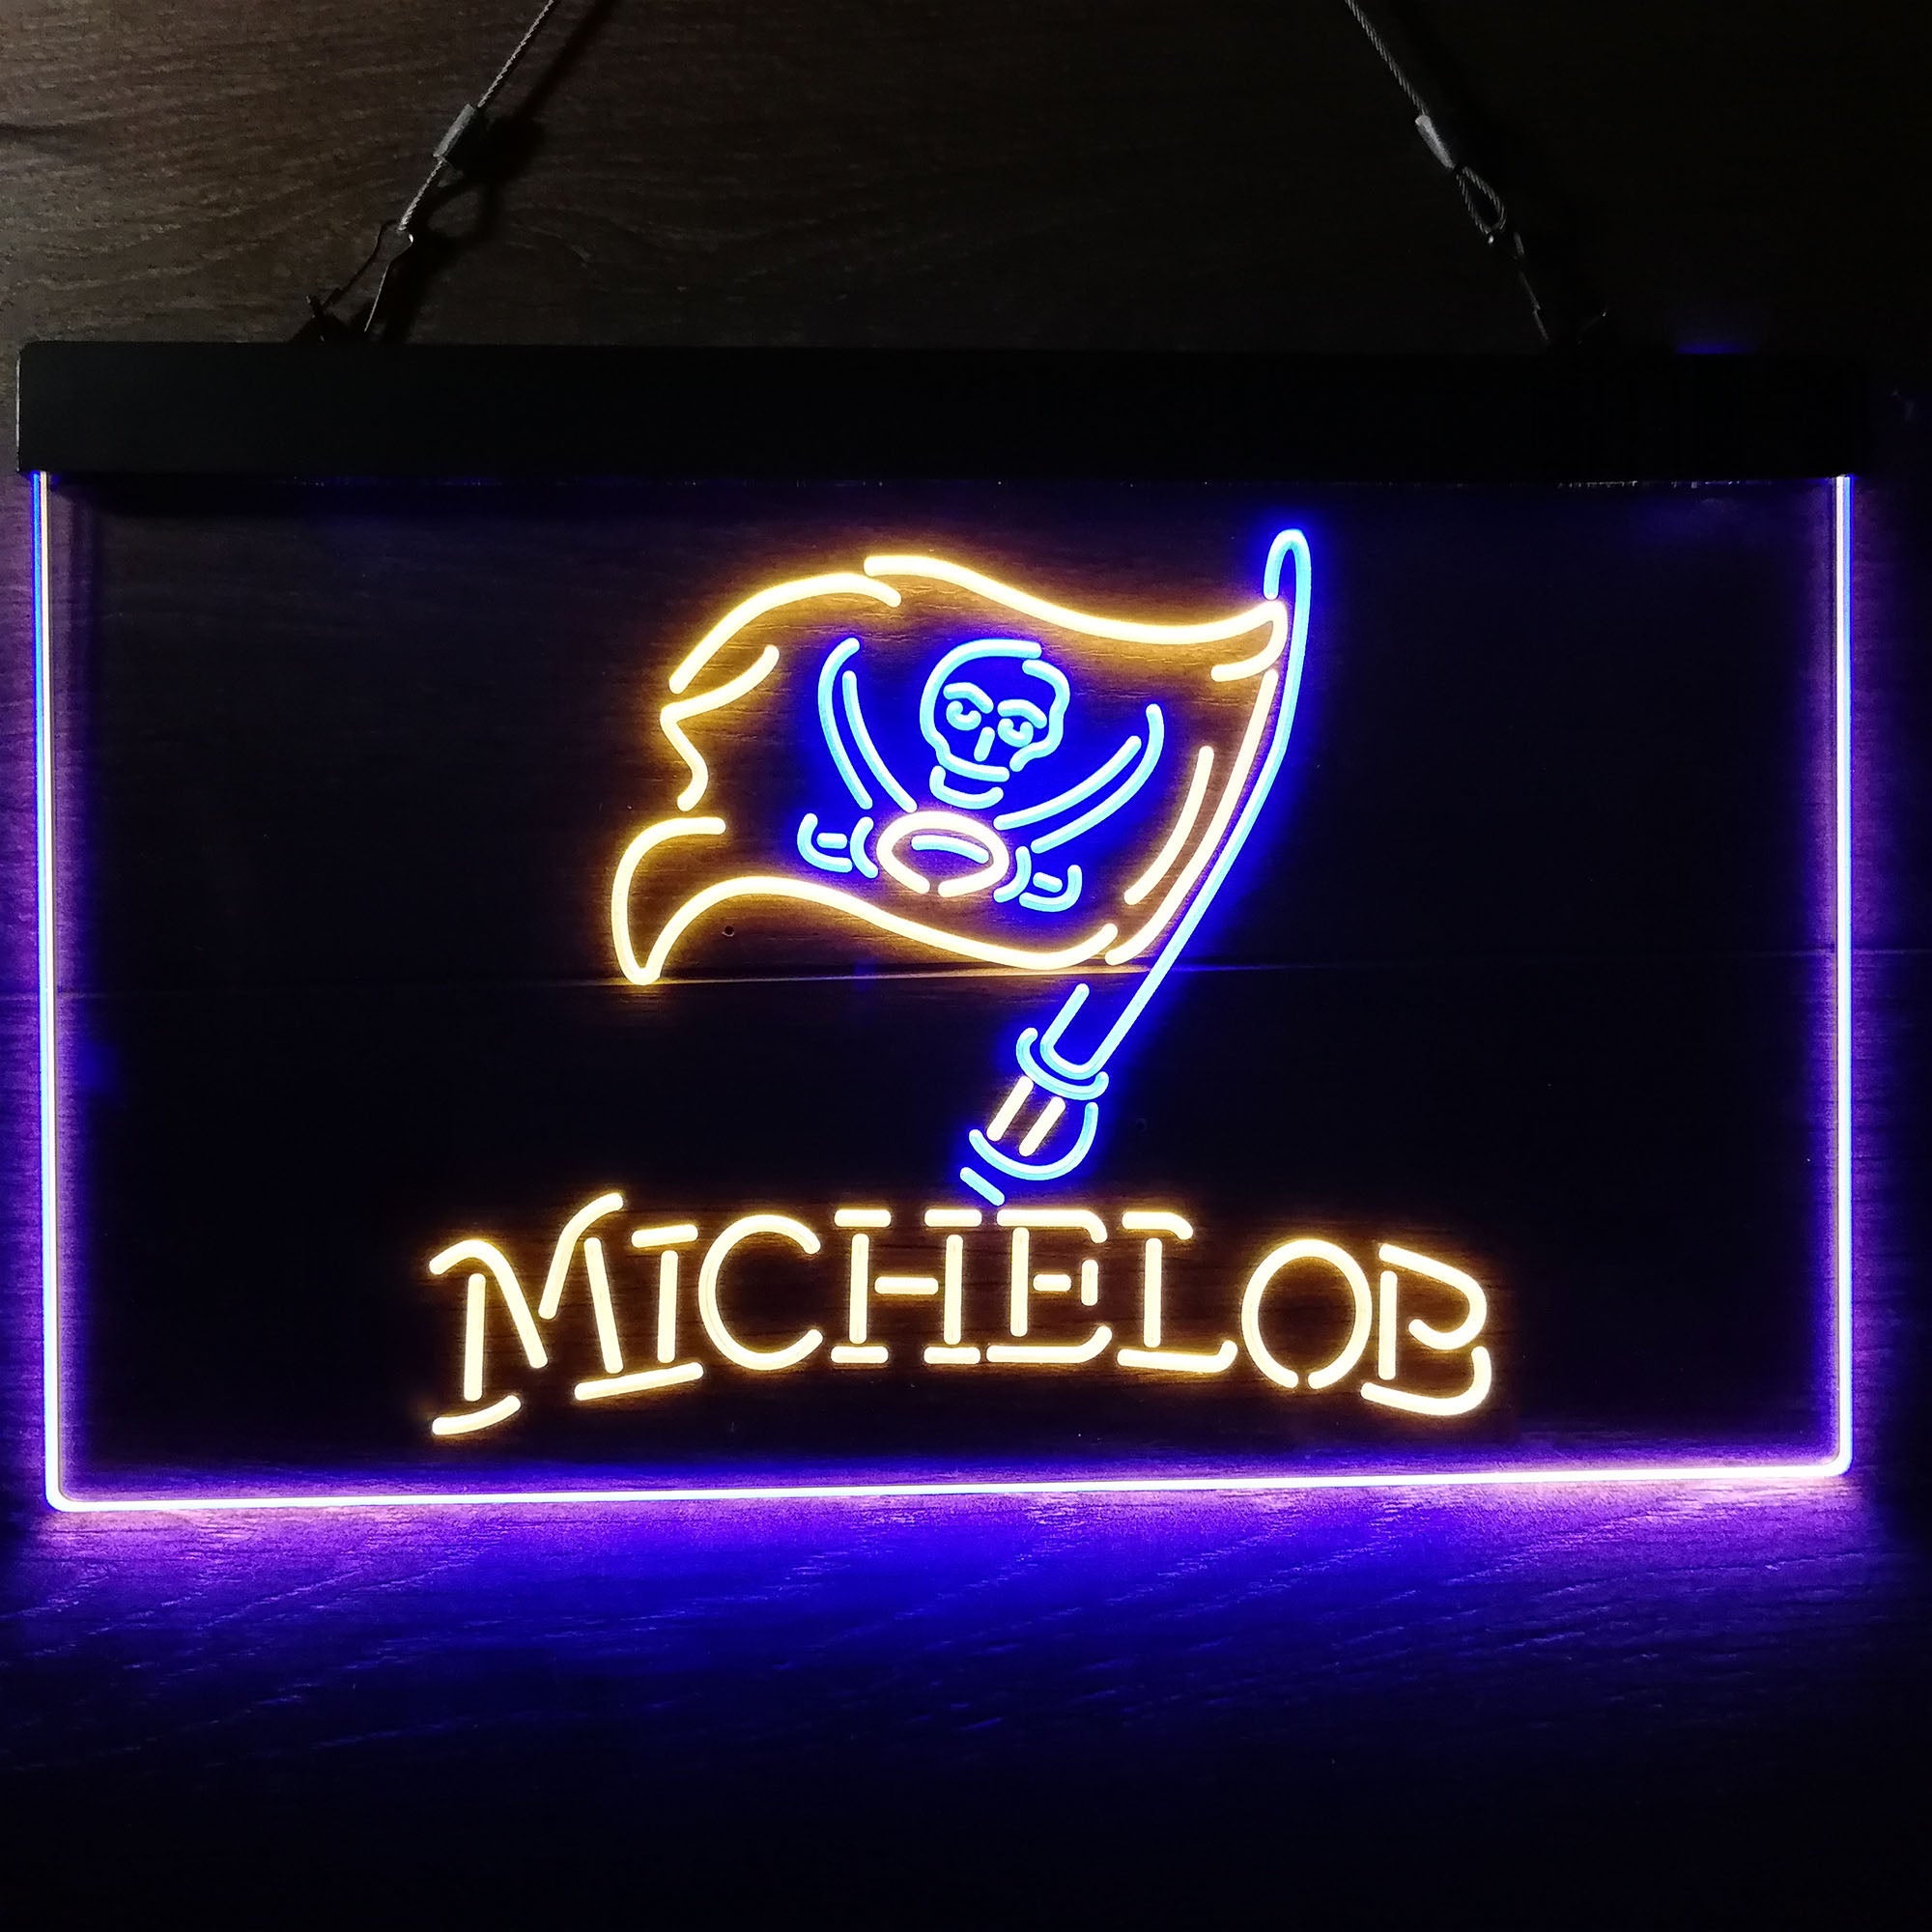 Michelob Bar Tampa Bay Buccaneers Est. 1976 LED Neon Sign